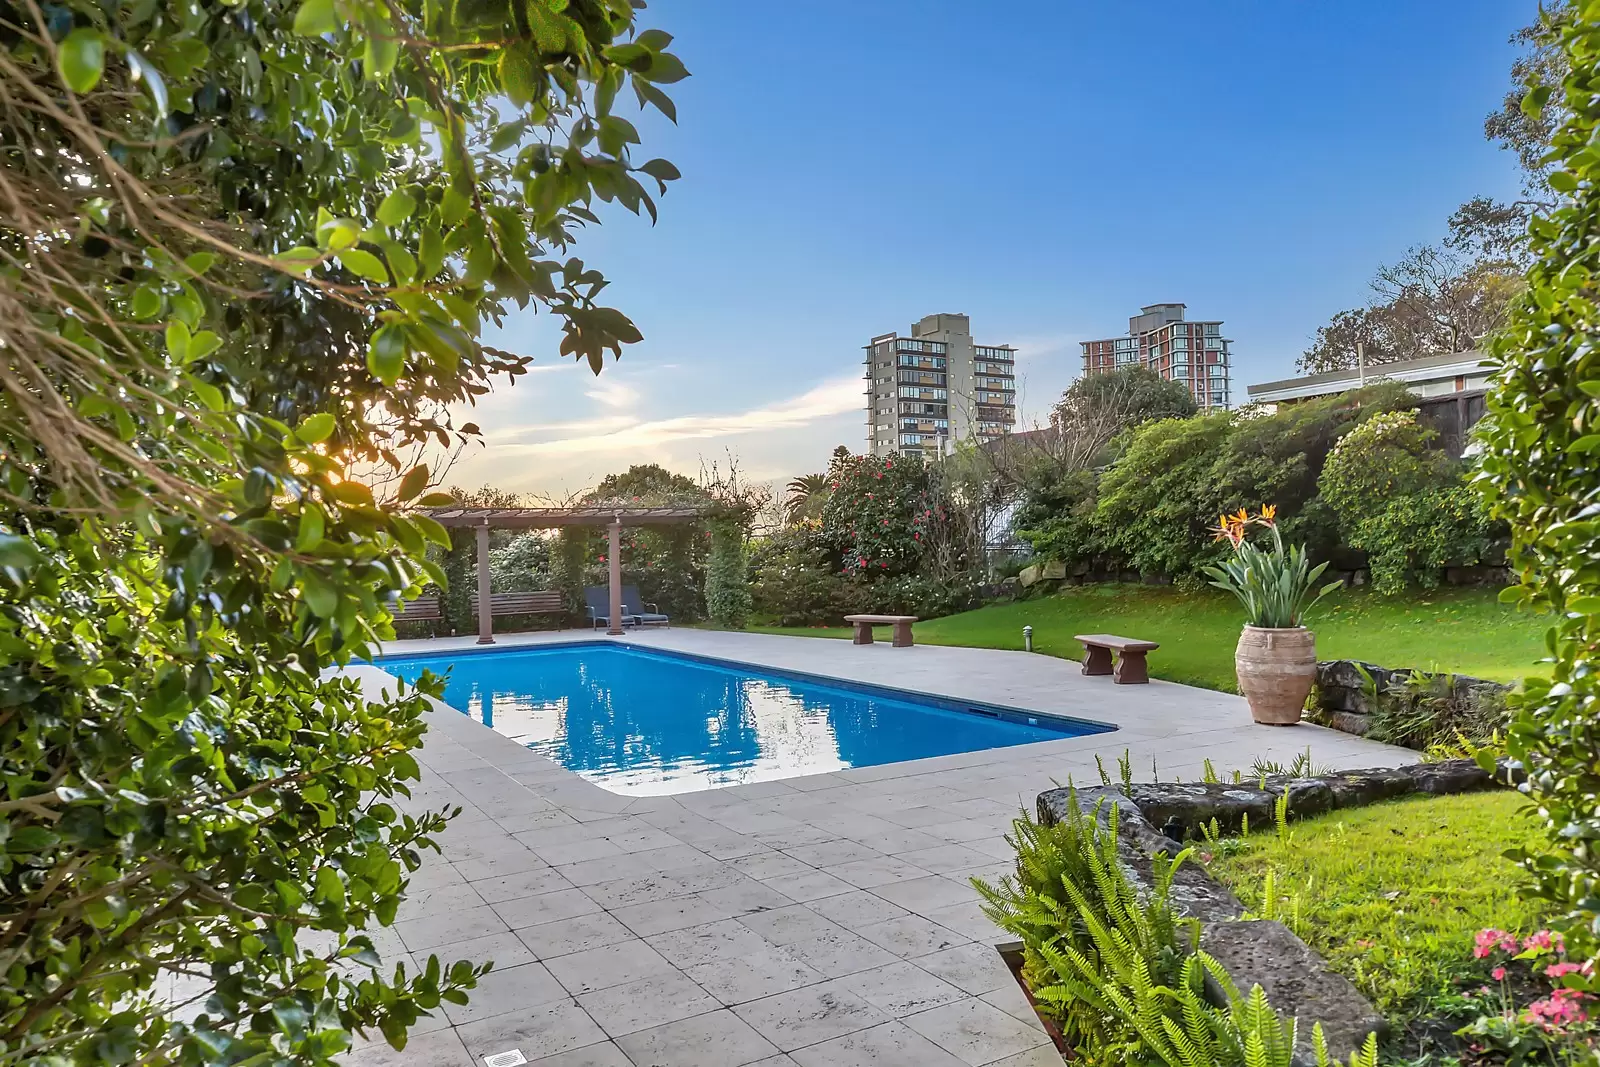 Photo #10: 32/60 Darling Point Road, Darling Point - Sold by Sydney Sotheby's International Realty